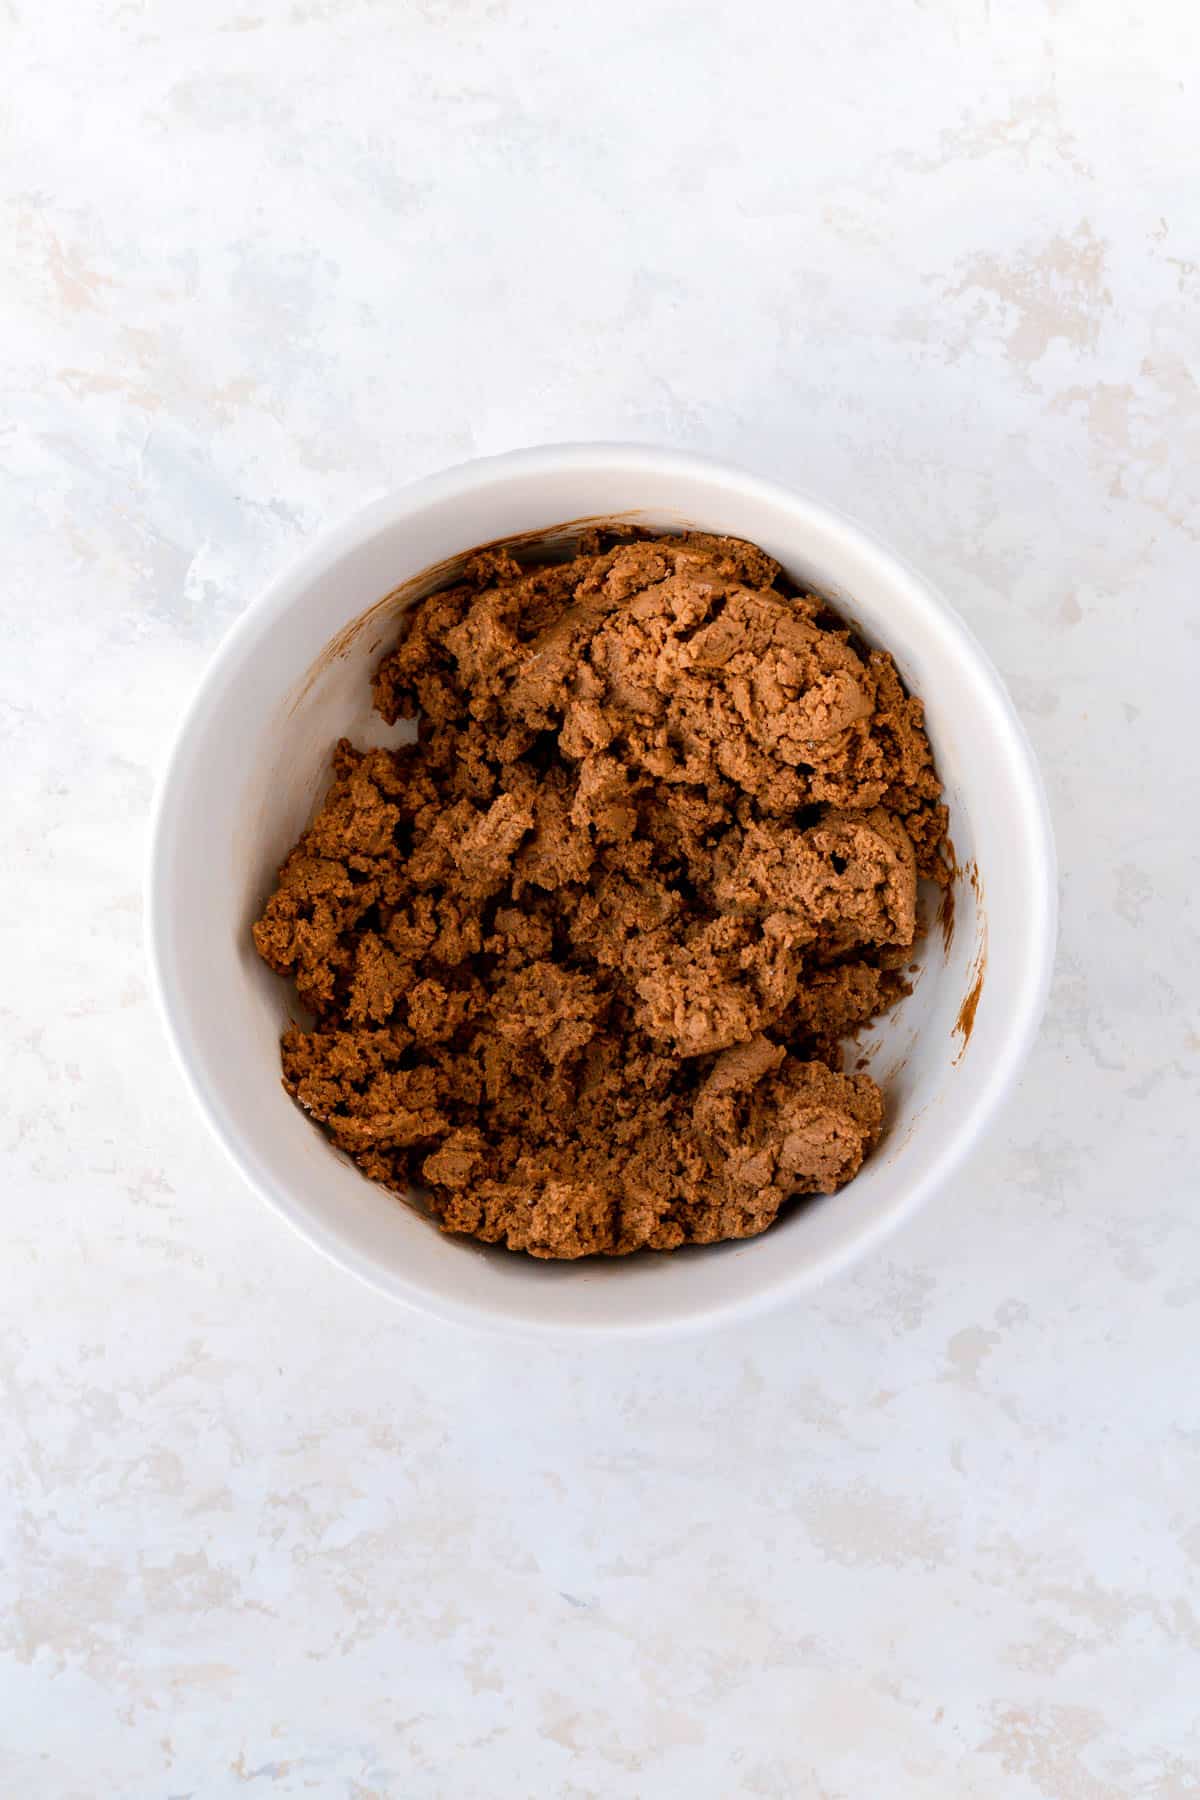 Fully mixed ginger cookie dough in a white bowl on a plaster background